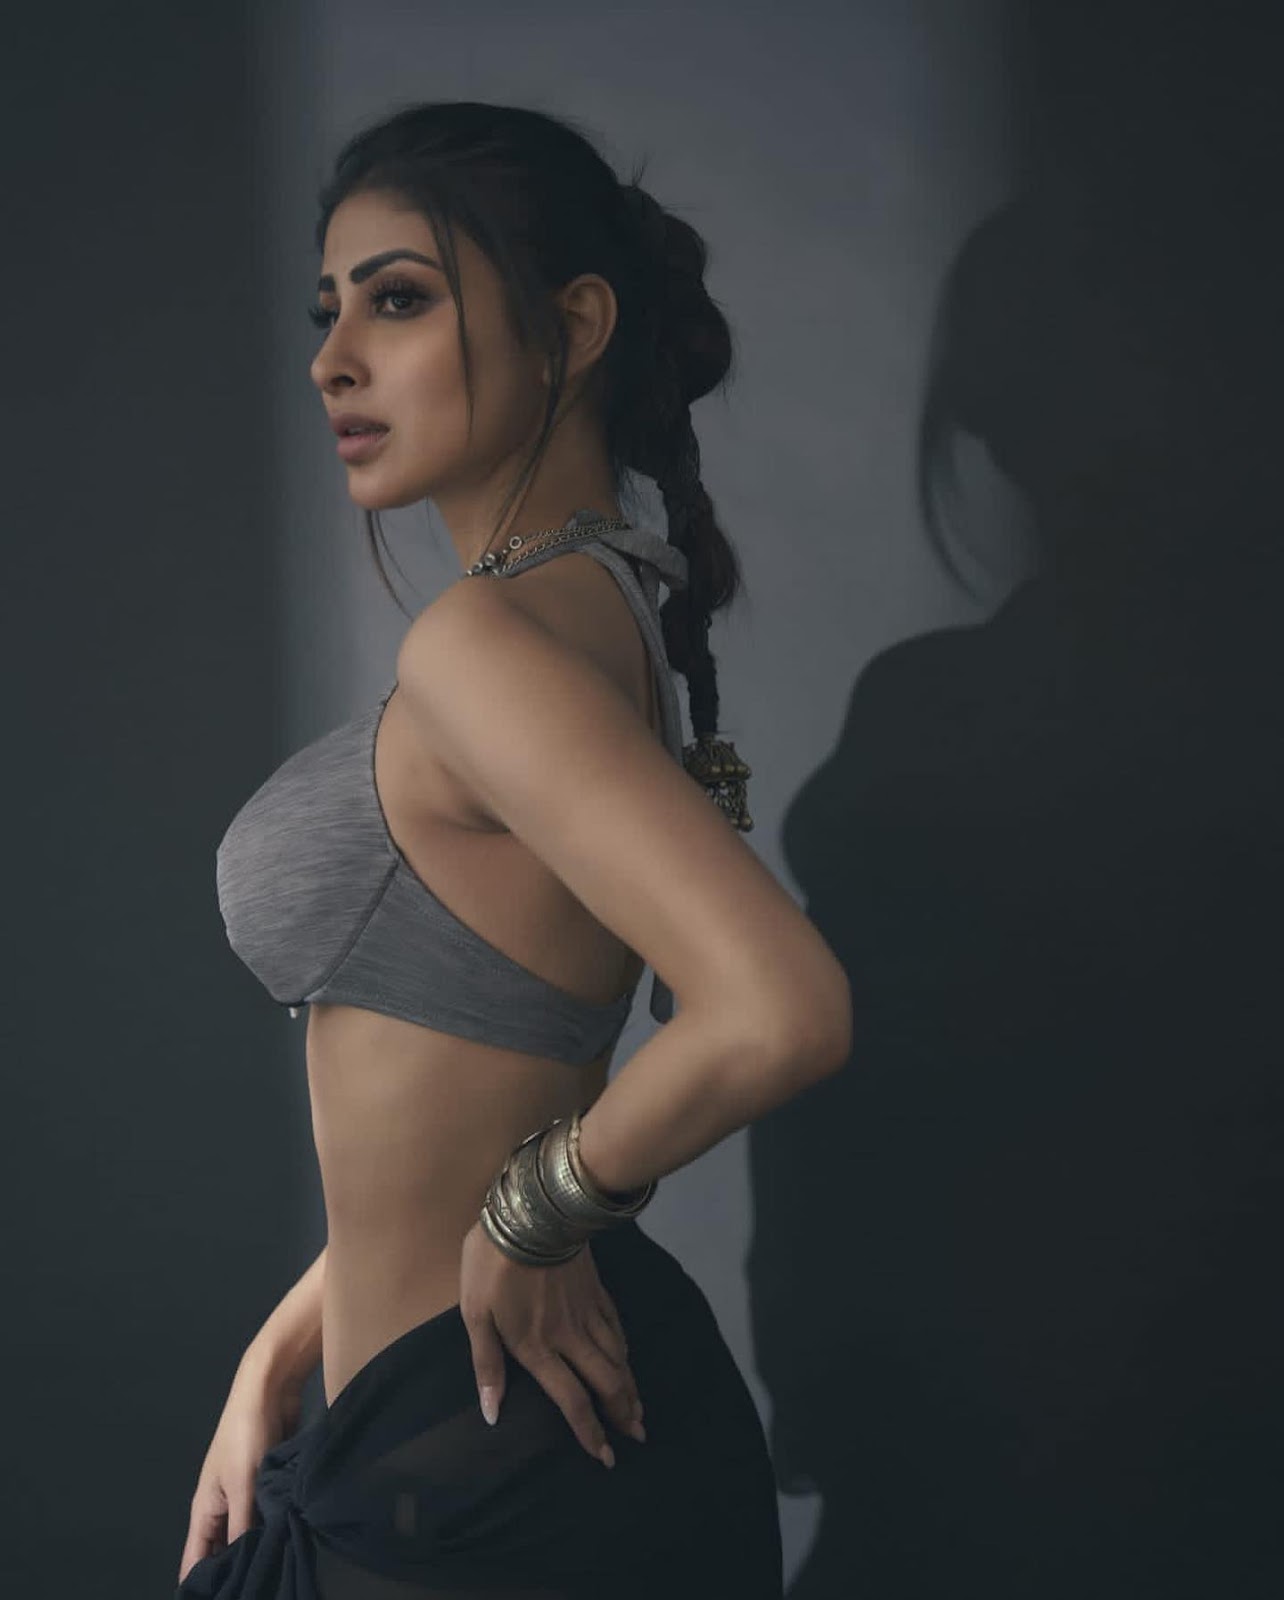 Mouni Roy S Latest Photoshoot In Tiny Bikini Top Flaunting Her Slim Body And Sexy Legs Sets